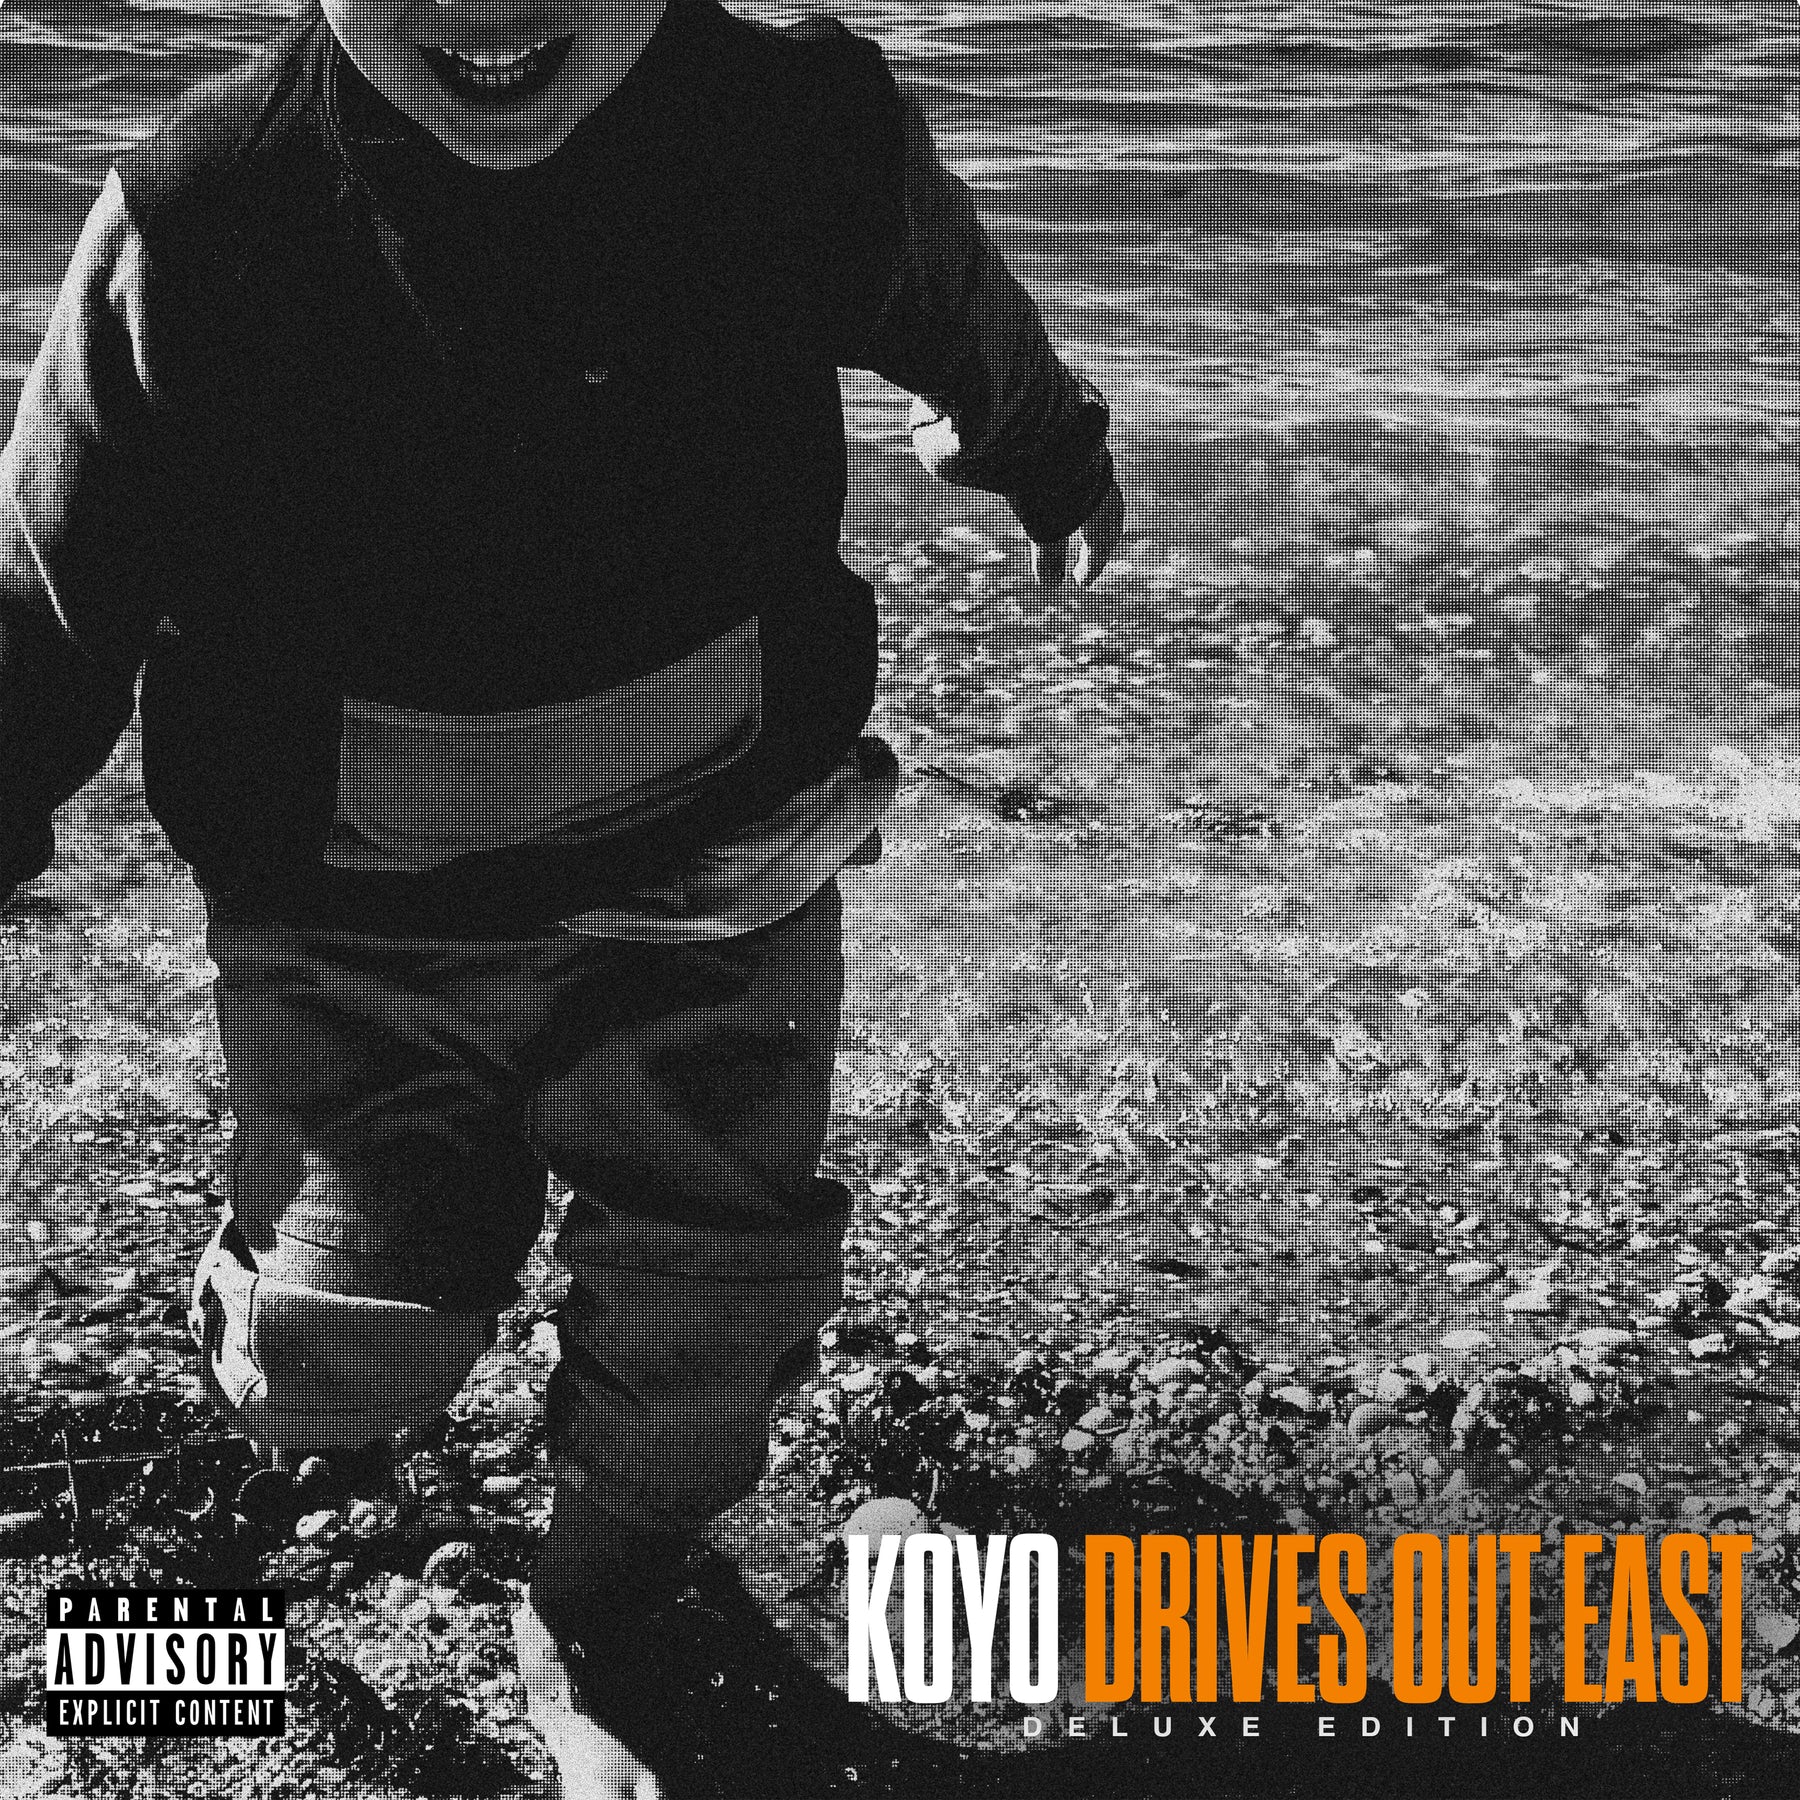 KOYO - DRIVES OUT EAST DELUXE Vinyl 12" EP